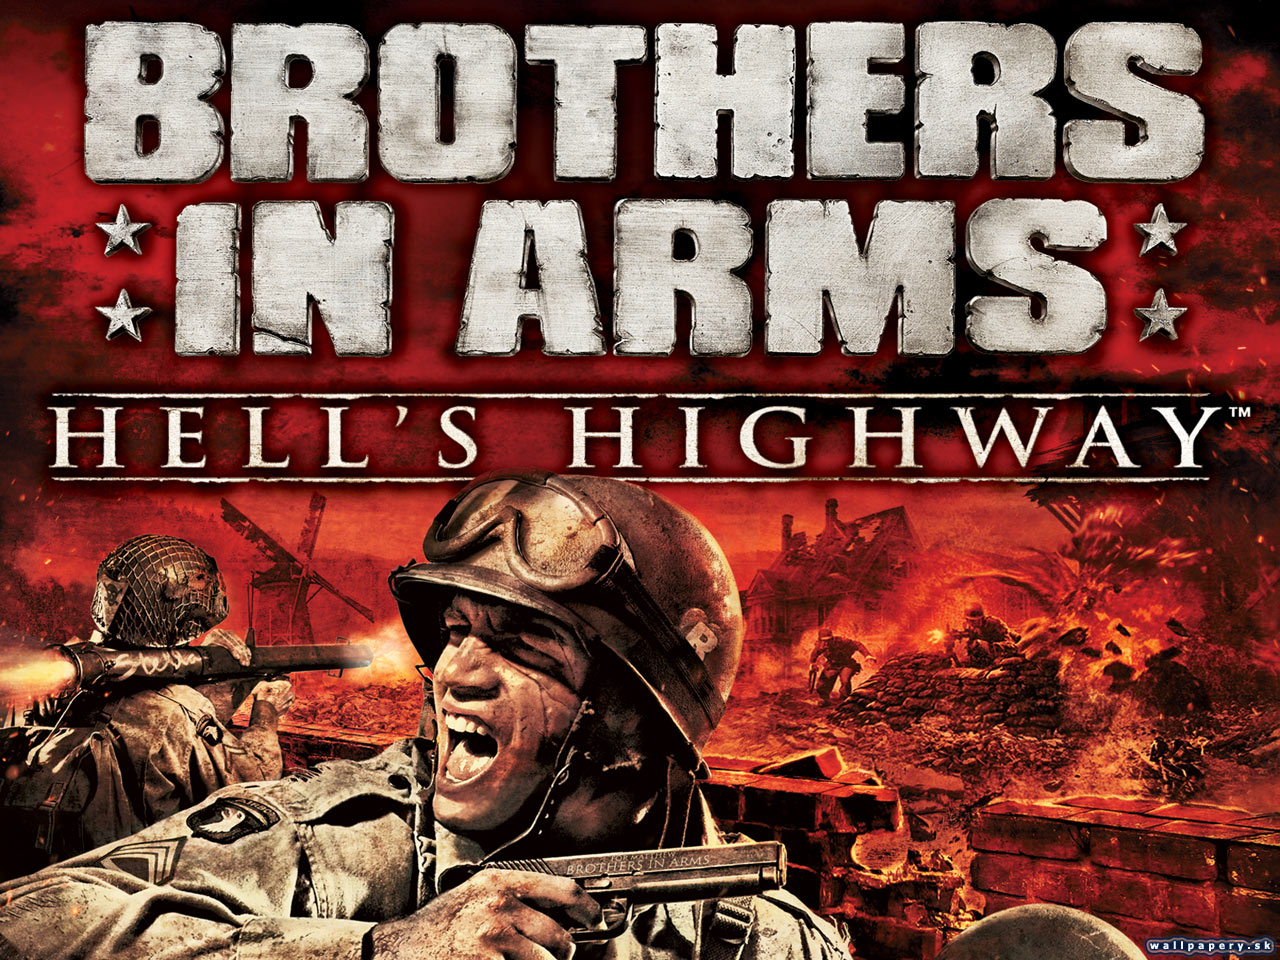 Brothers in Arms: Hell's Highway - wallpaper 7